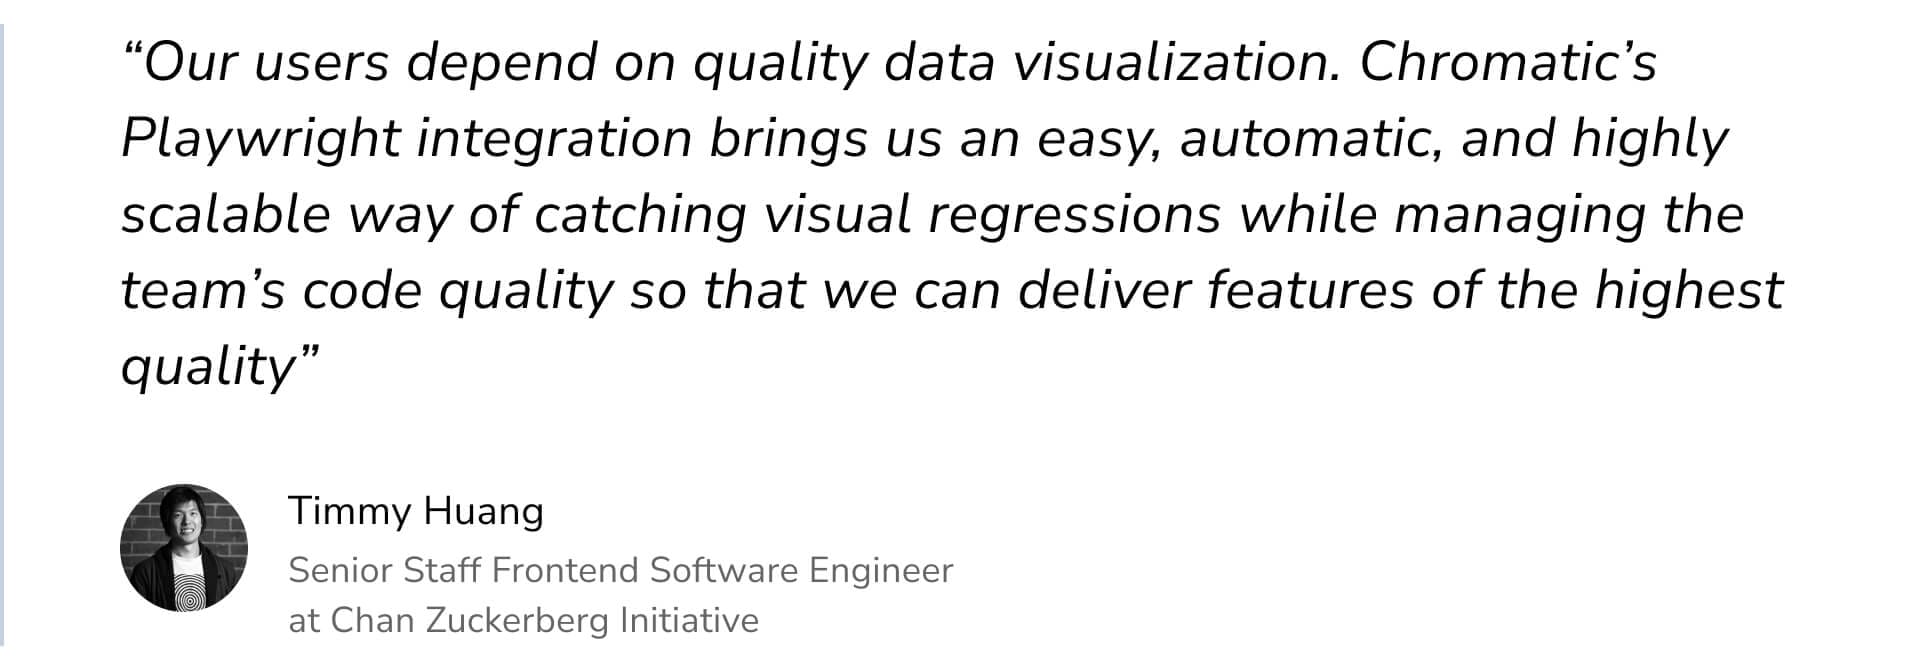 "Our users depend on quality data visualization. Chromatic's Playwright integration brings us an easy, automatic, and highly scalable way of catching visual regressions while managing the team's code quality so that we can deliver features of the highest quality" by Timmy Huang Senior Staff Frontend Software Engineer at Chan Zuckerberg Initiative